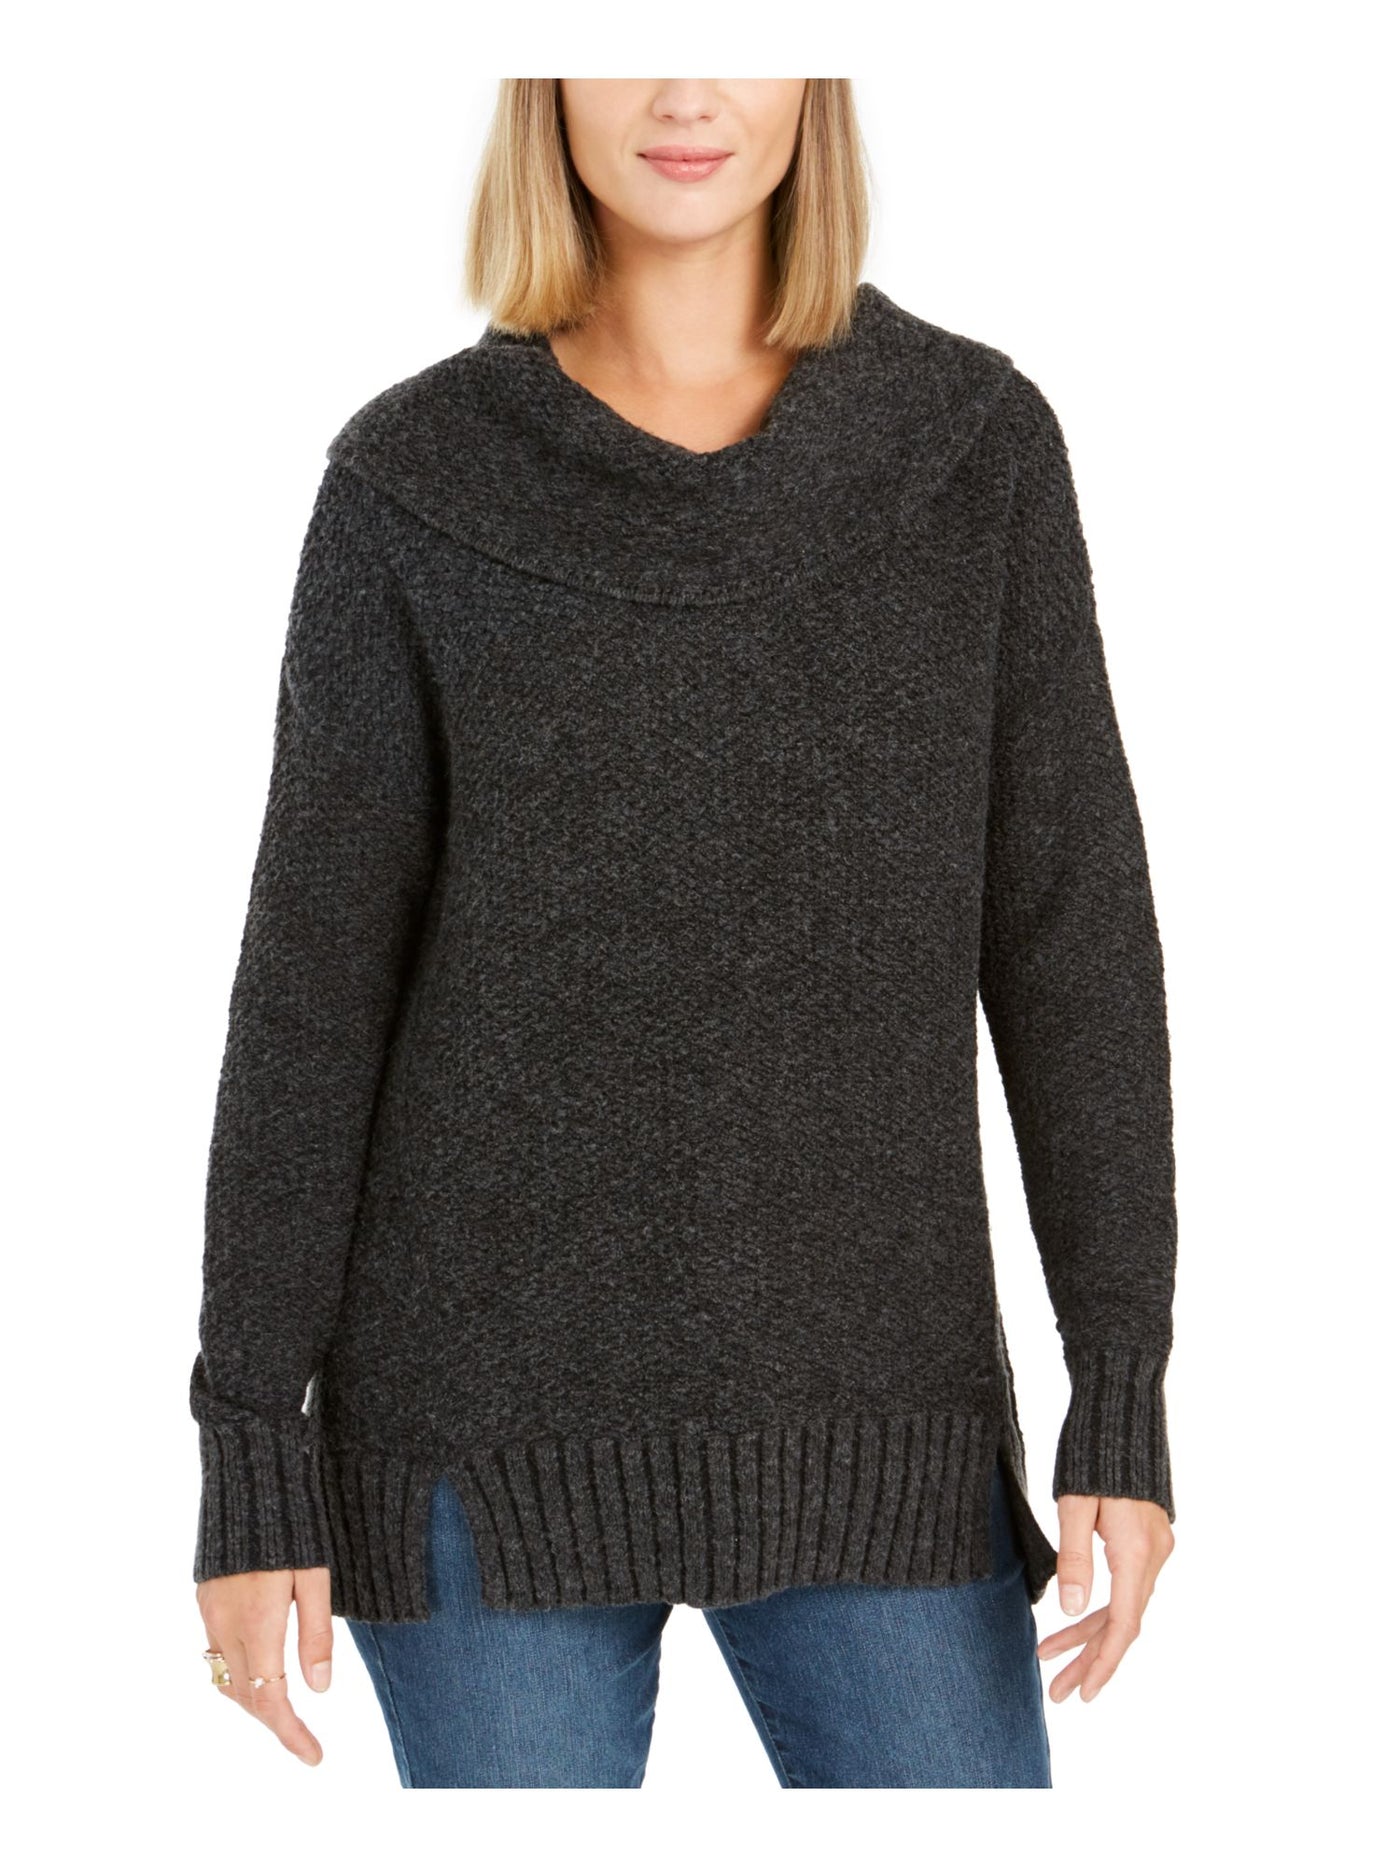 STYLE & COMPANY Womens Black Textured Long Sleeve Cowl Neck Sweater Petites PXL